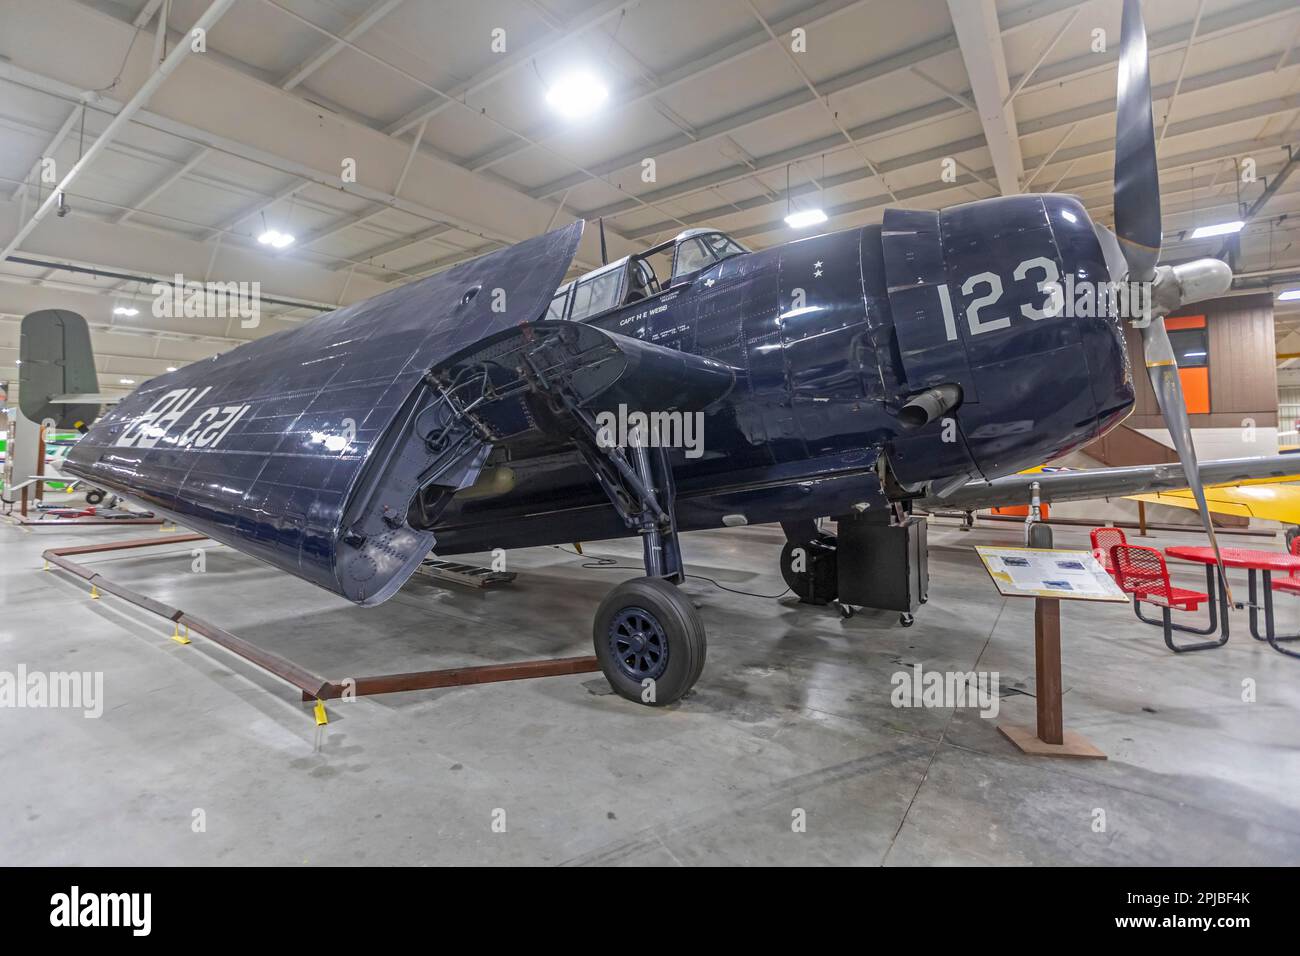 Liberal, Kansas, The Mid-America Air Museum. The museum displays over 100 aircraft. The Grumman TBM Avenger was the U.S. Navys torpedo bomber during Stock Photo